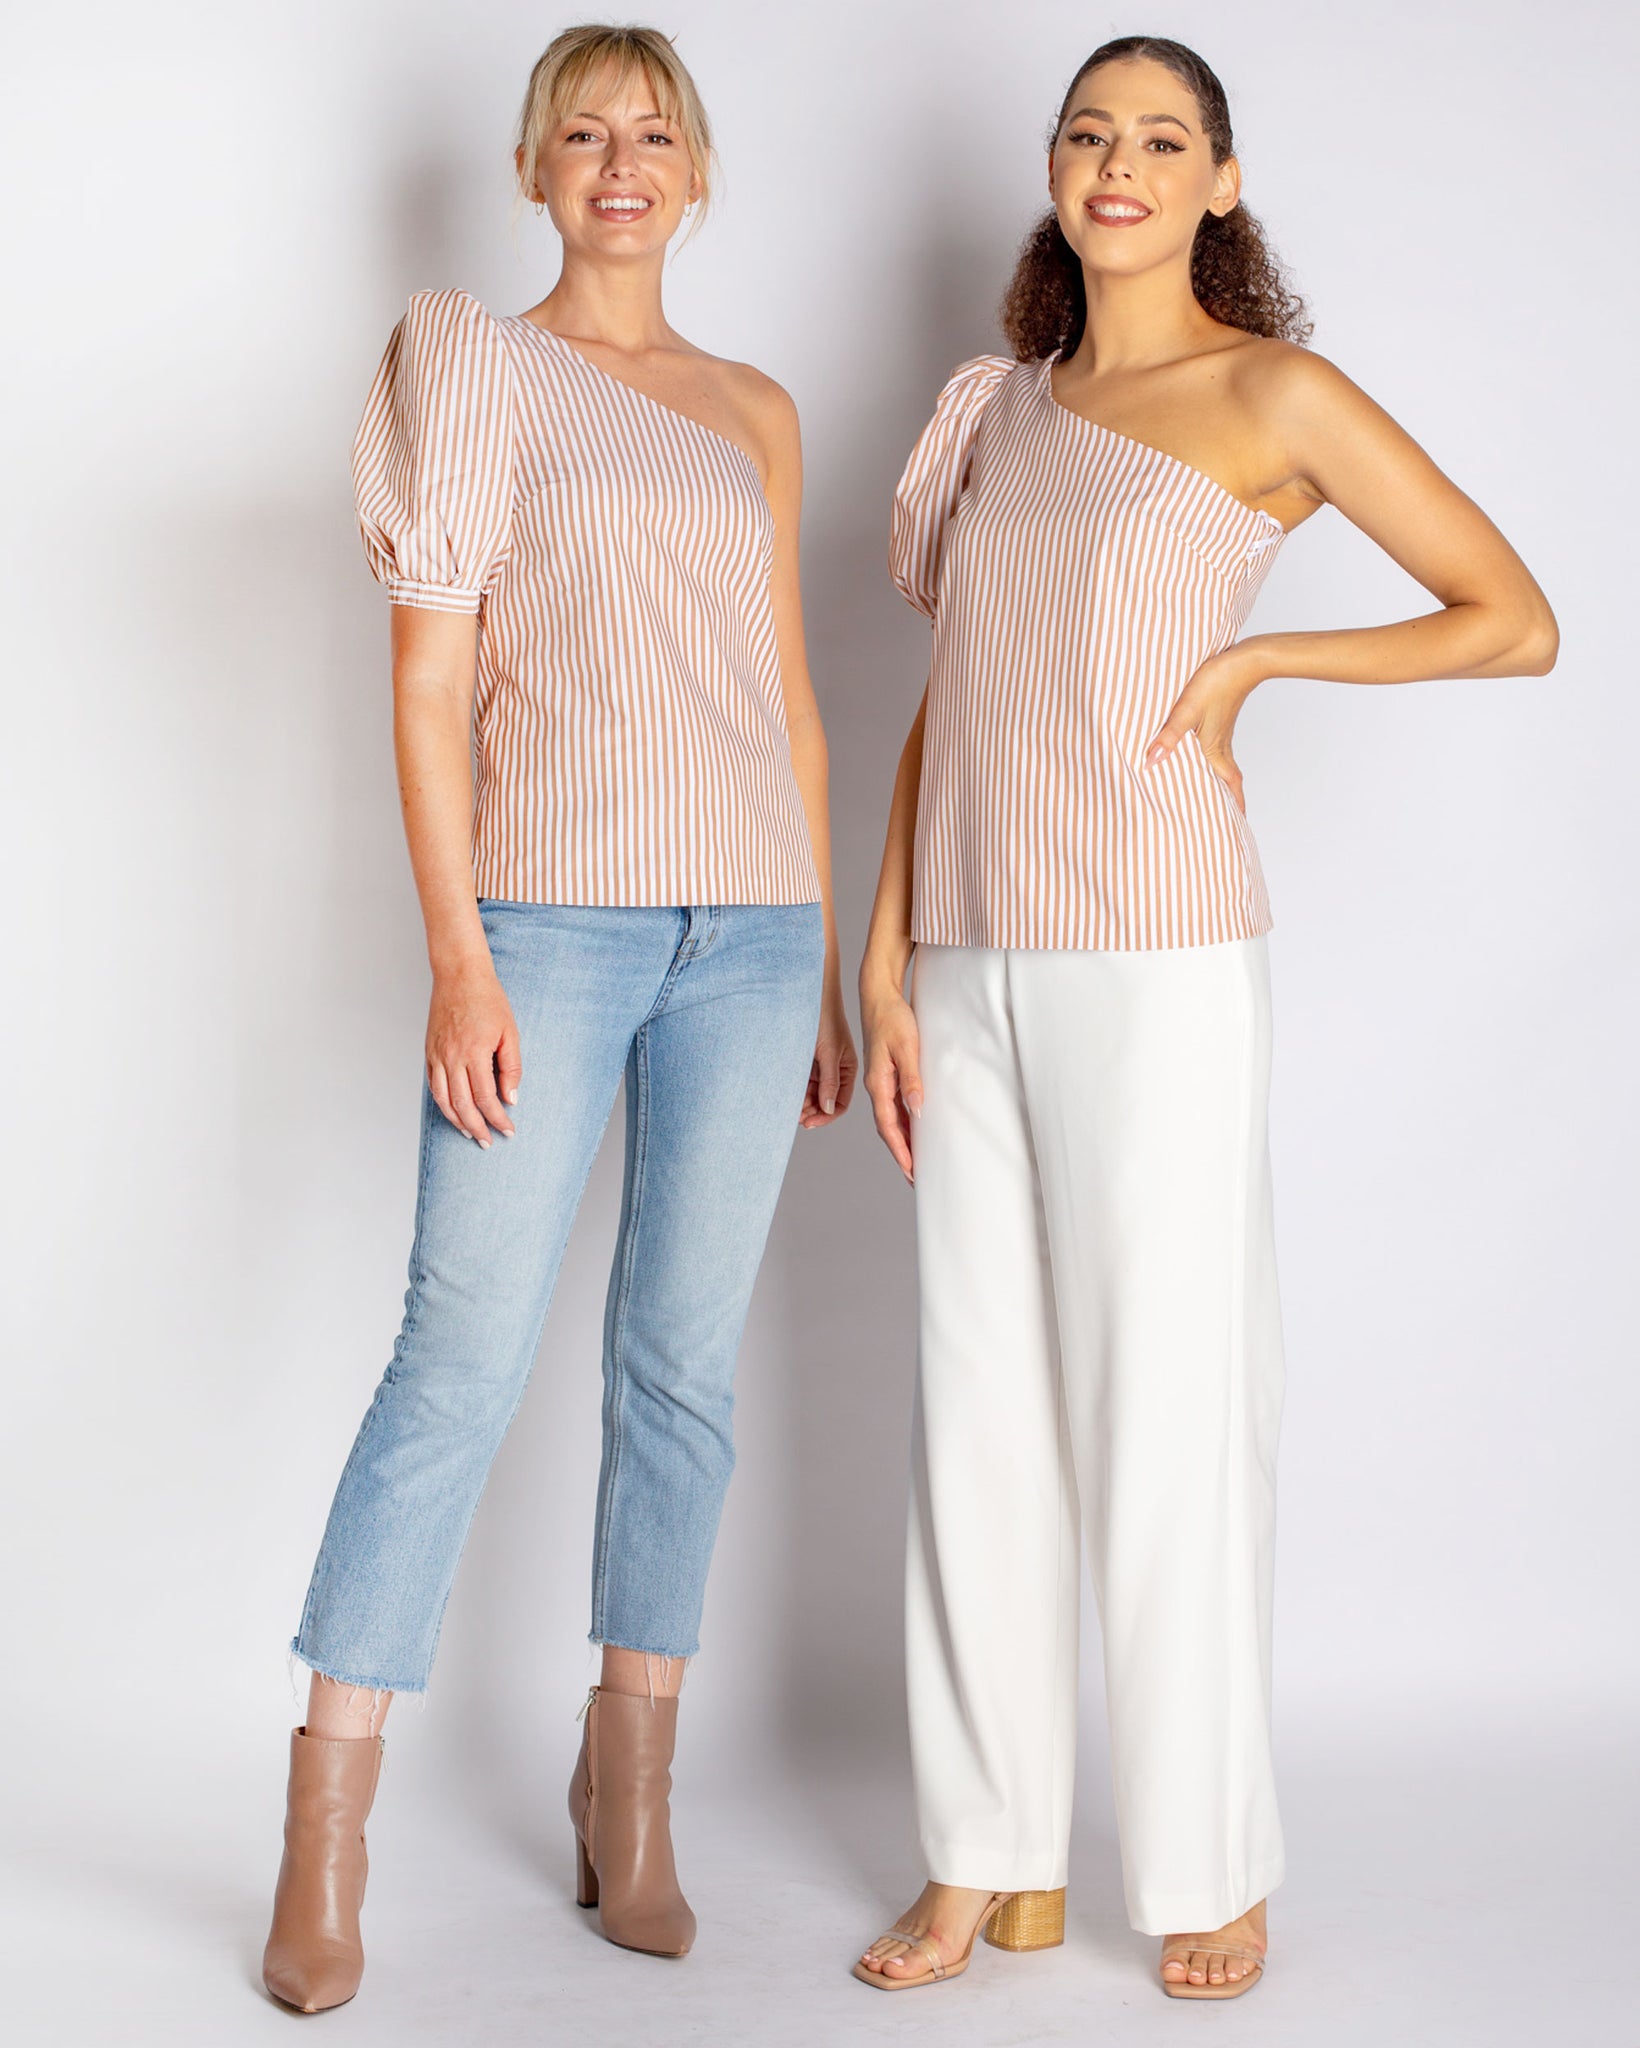 The Ava Top in Cotton- SALE